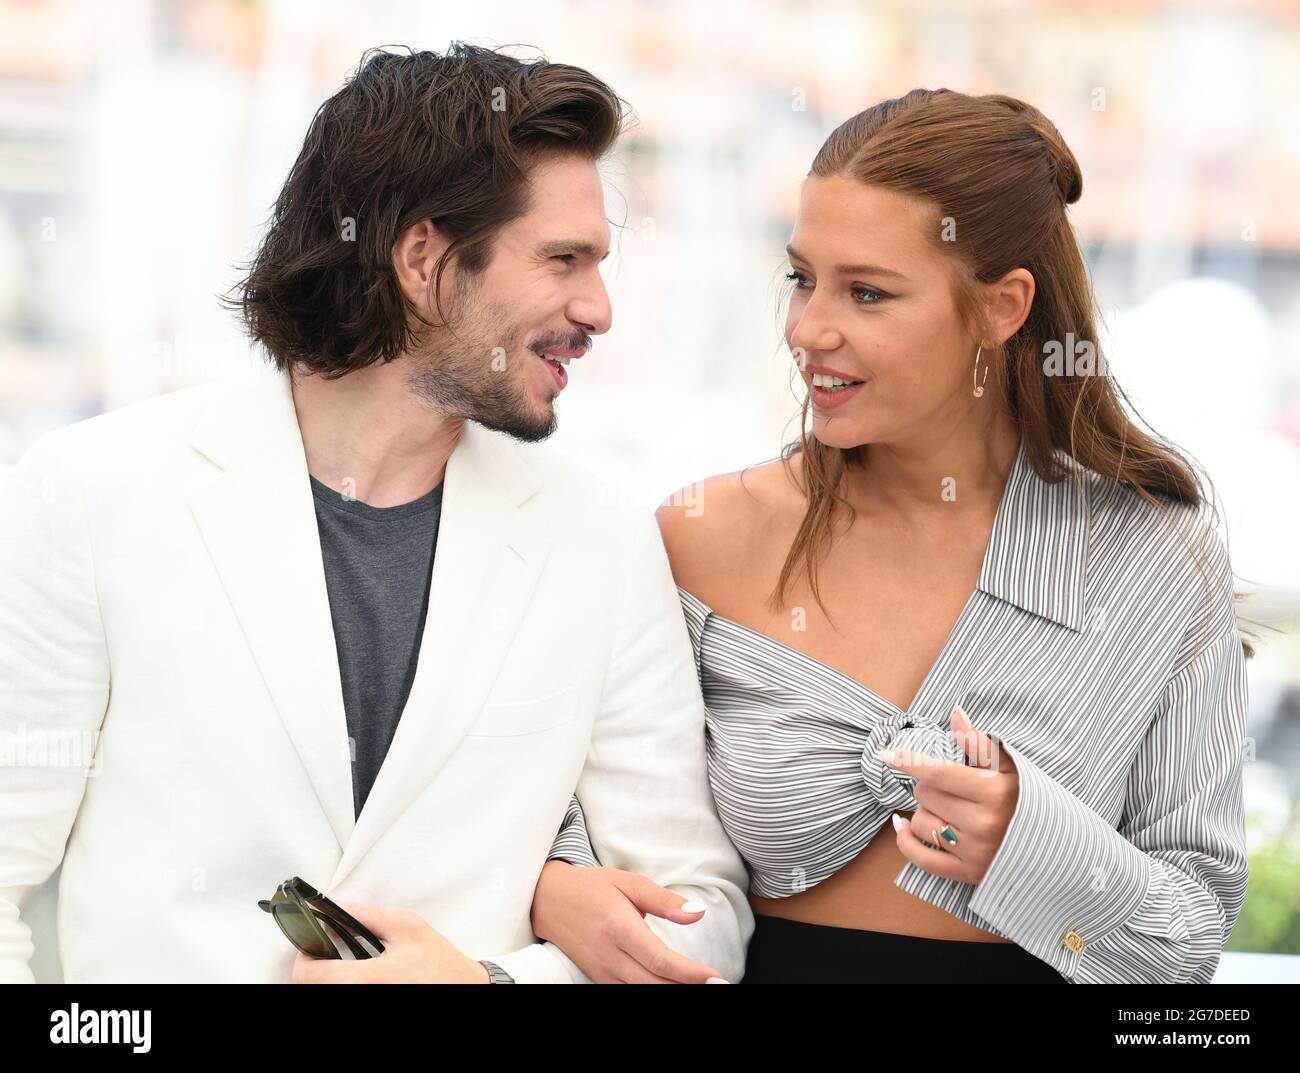 Cannes, France, 13 July 2021 Francois Civil and Adèle Exarchopoulos at the photocall for Bac Nord, held at the Palais des Festival. Part of the 74th Cannes Film Festival. Credit: Doug Peters/EMPICS/Alamy Live News Stock Photo